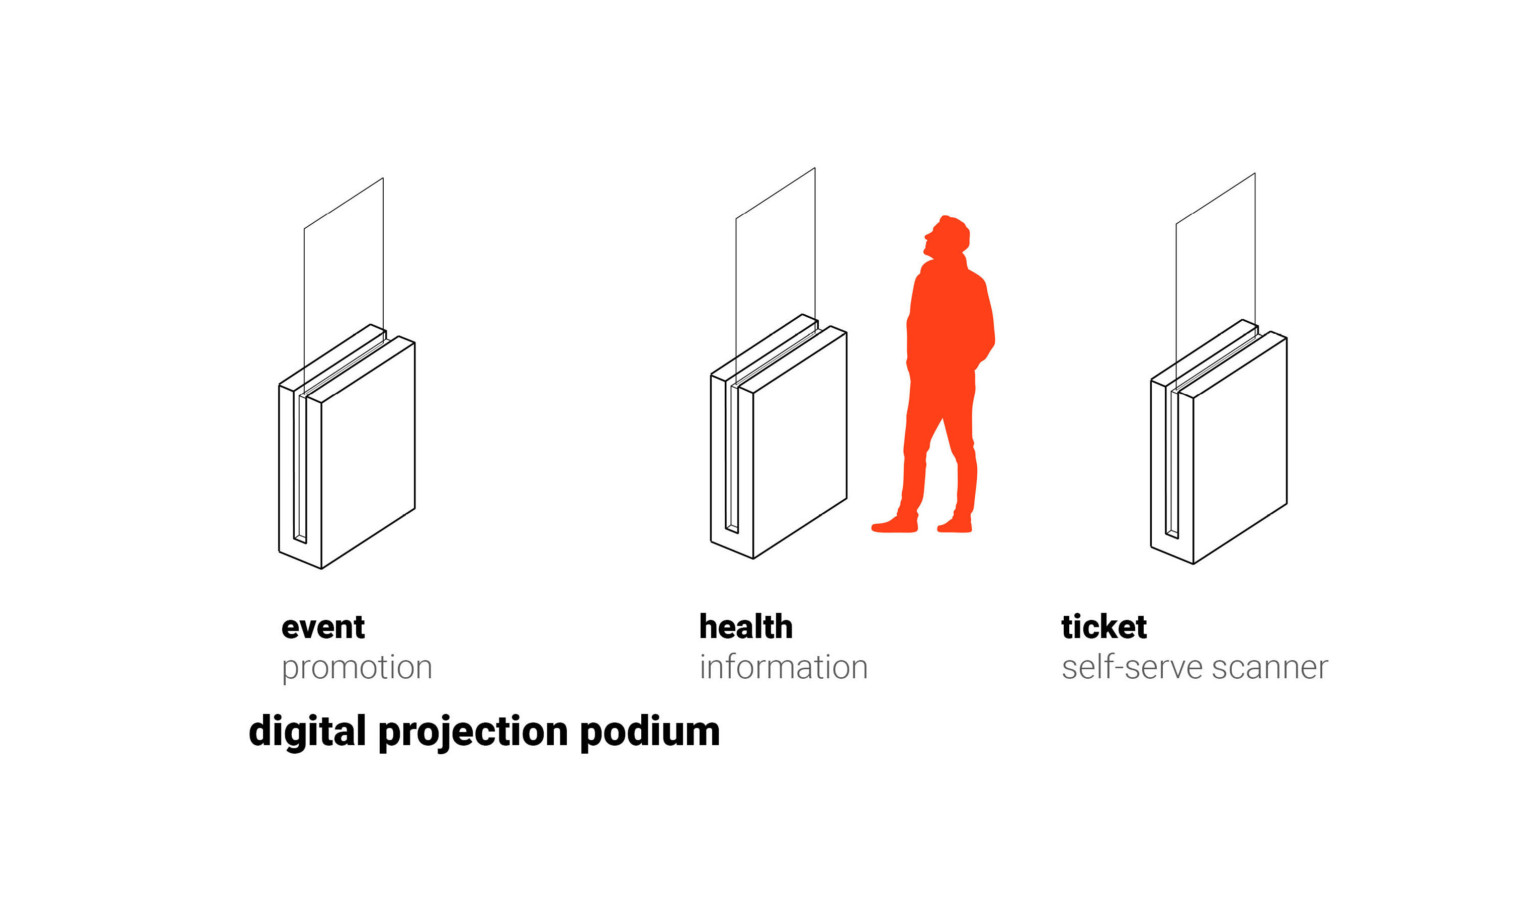 Diagram labeled Digital Projection Podium with 3 displays labeled event promotion, health information, and ticket scanner